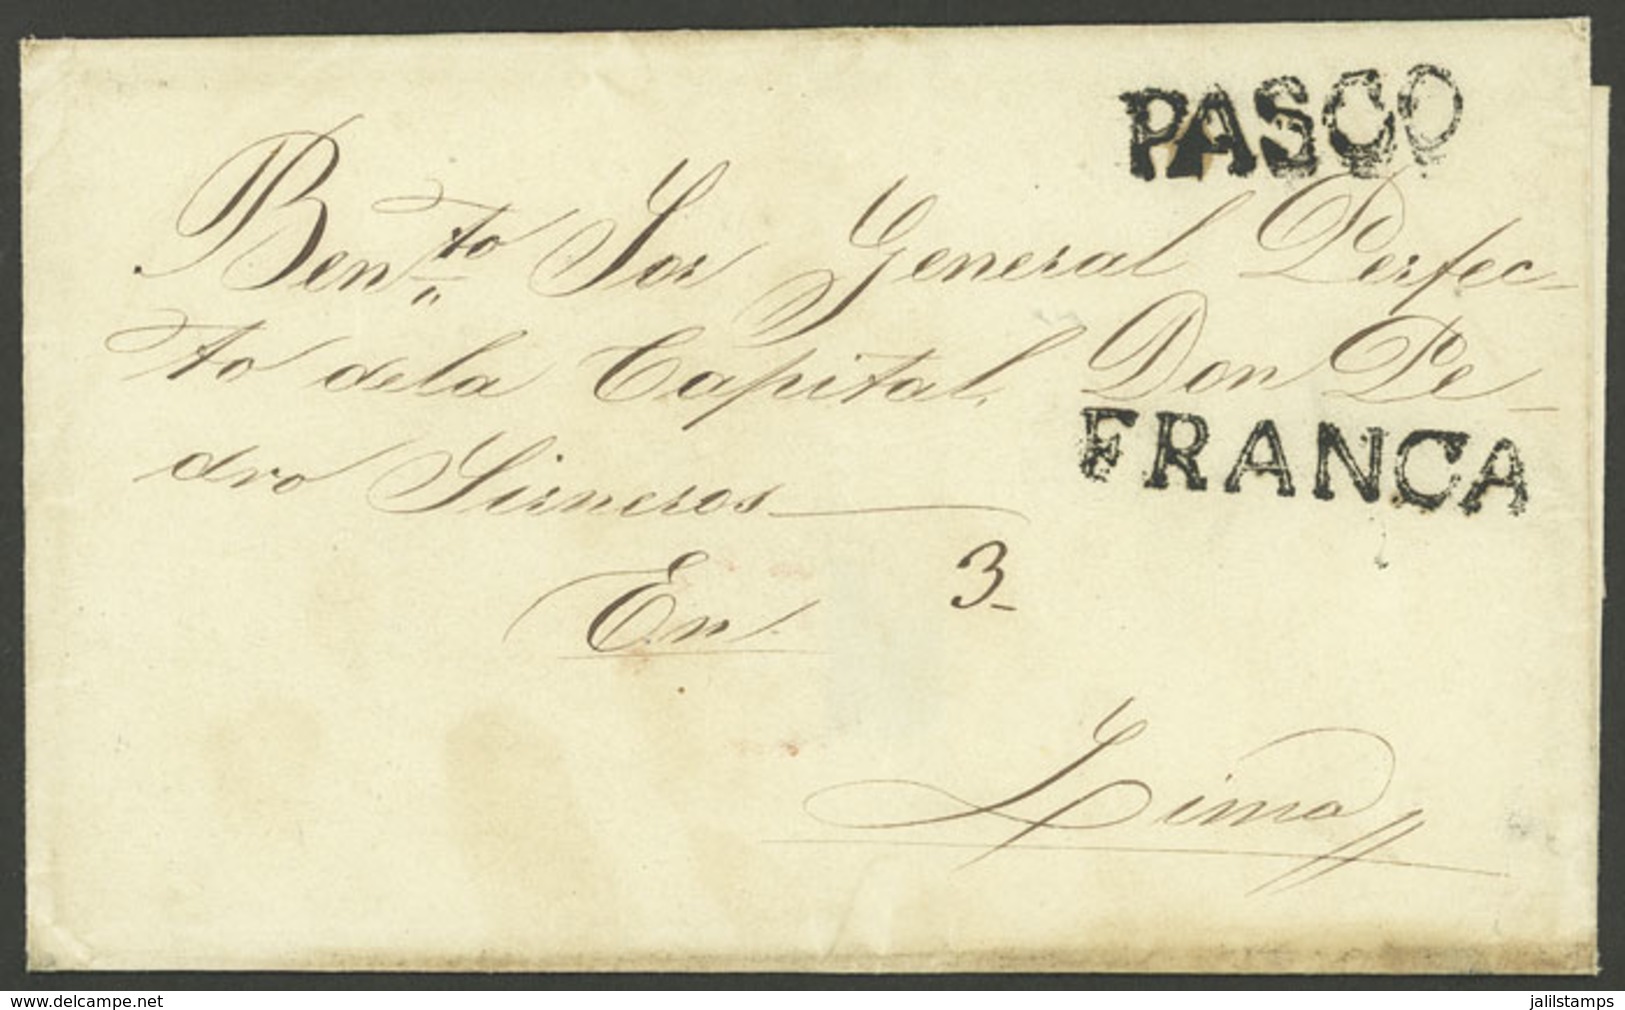 PERU: Folded Cover Sent To Lima, With "3" Rating And The Marks "PASCO" And "FRANCA" Perfectly Applied, Very Fine Quality - Peru